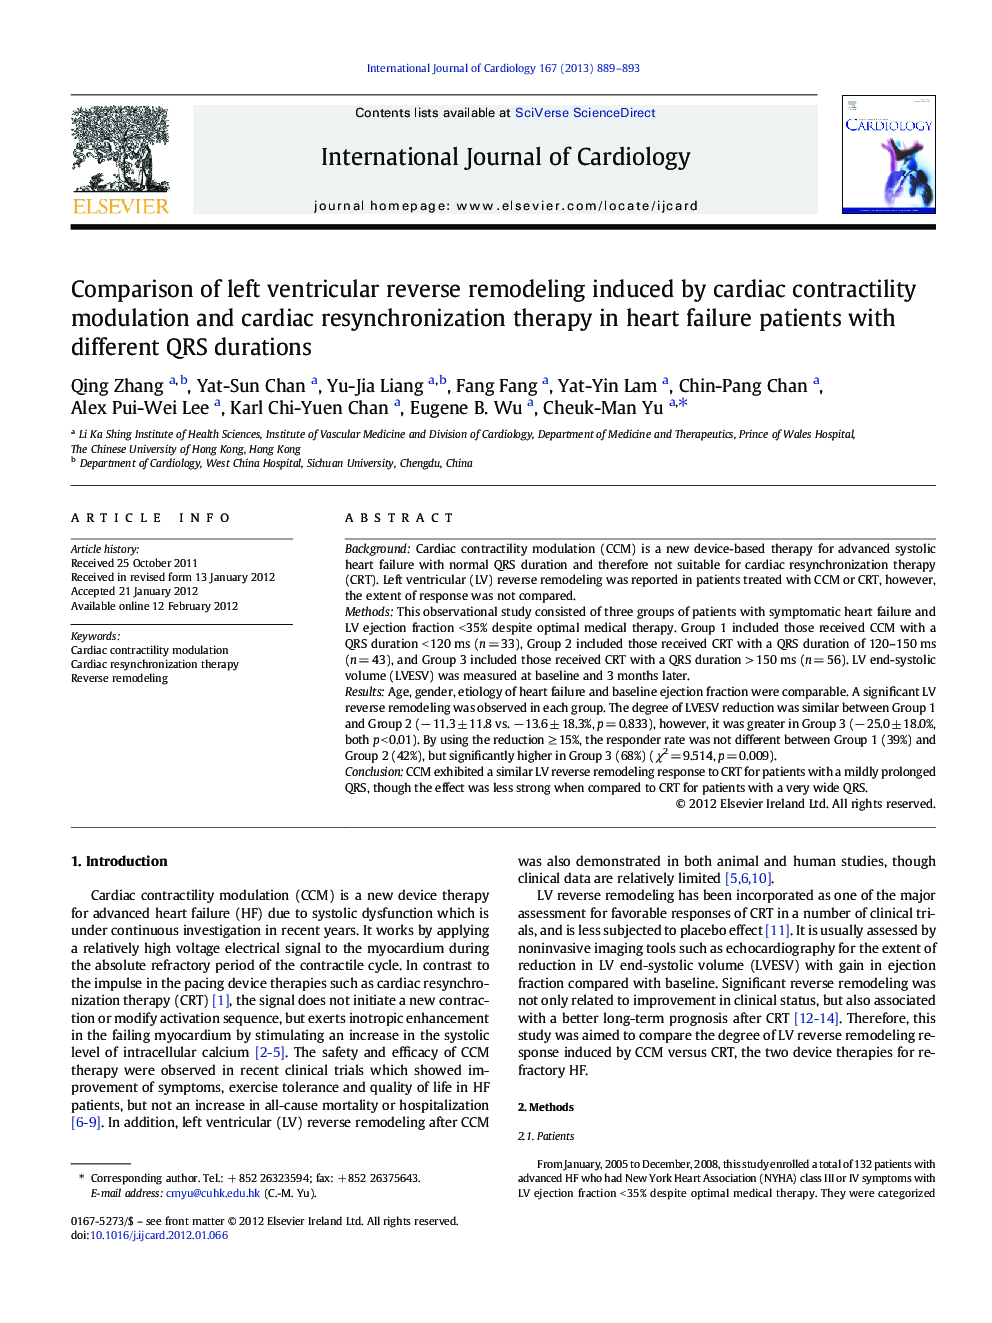 Comparison of left ventricular reverse remodeling induced by cardiac contractility modulation and cardiac resynchronization therapy in heart failure patients with different QRS durations